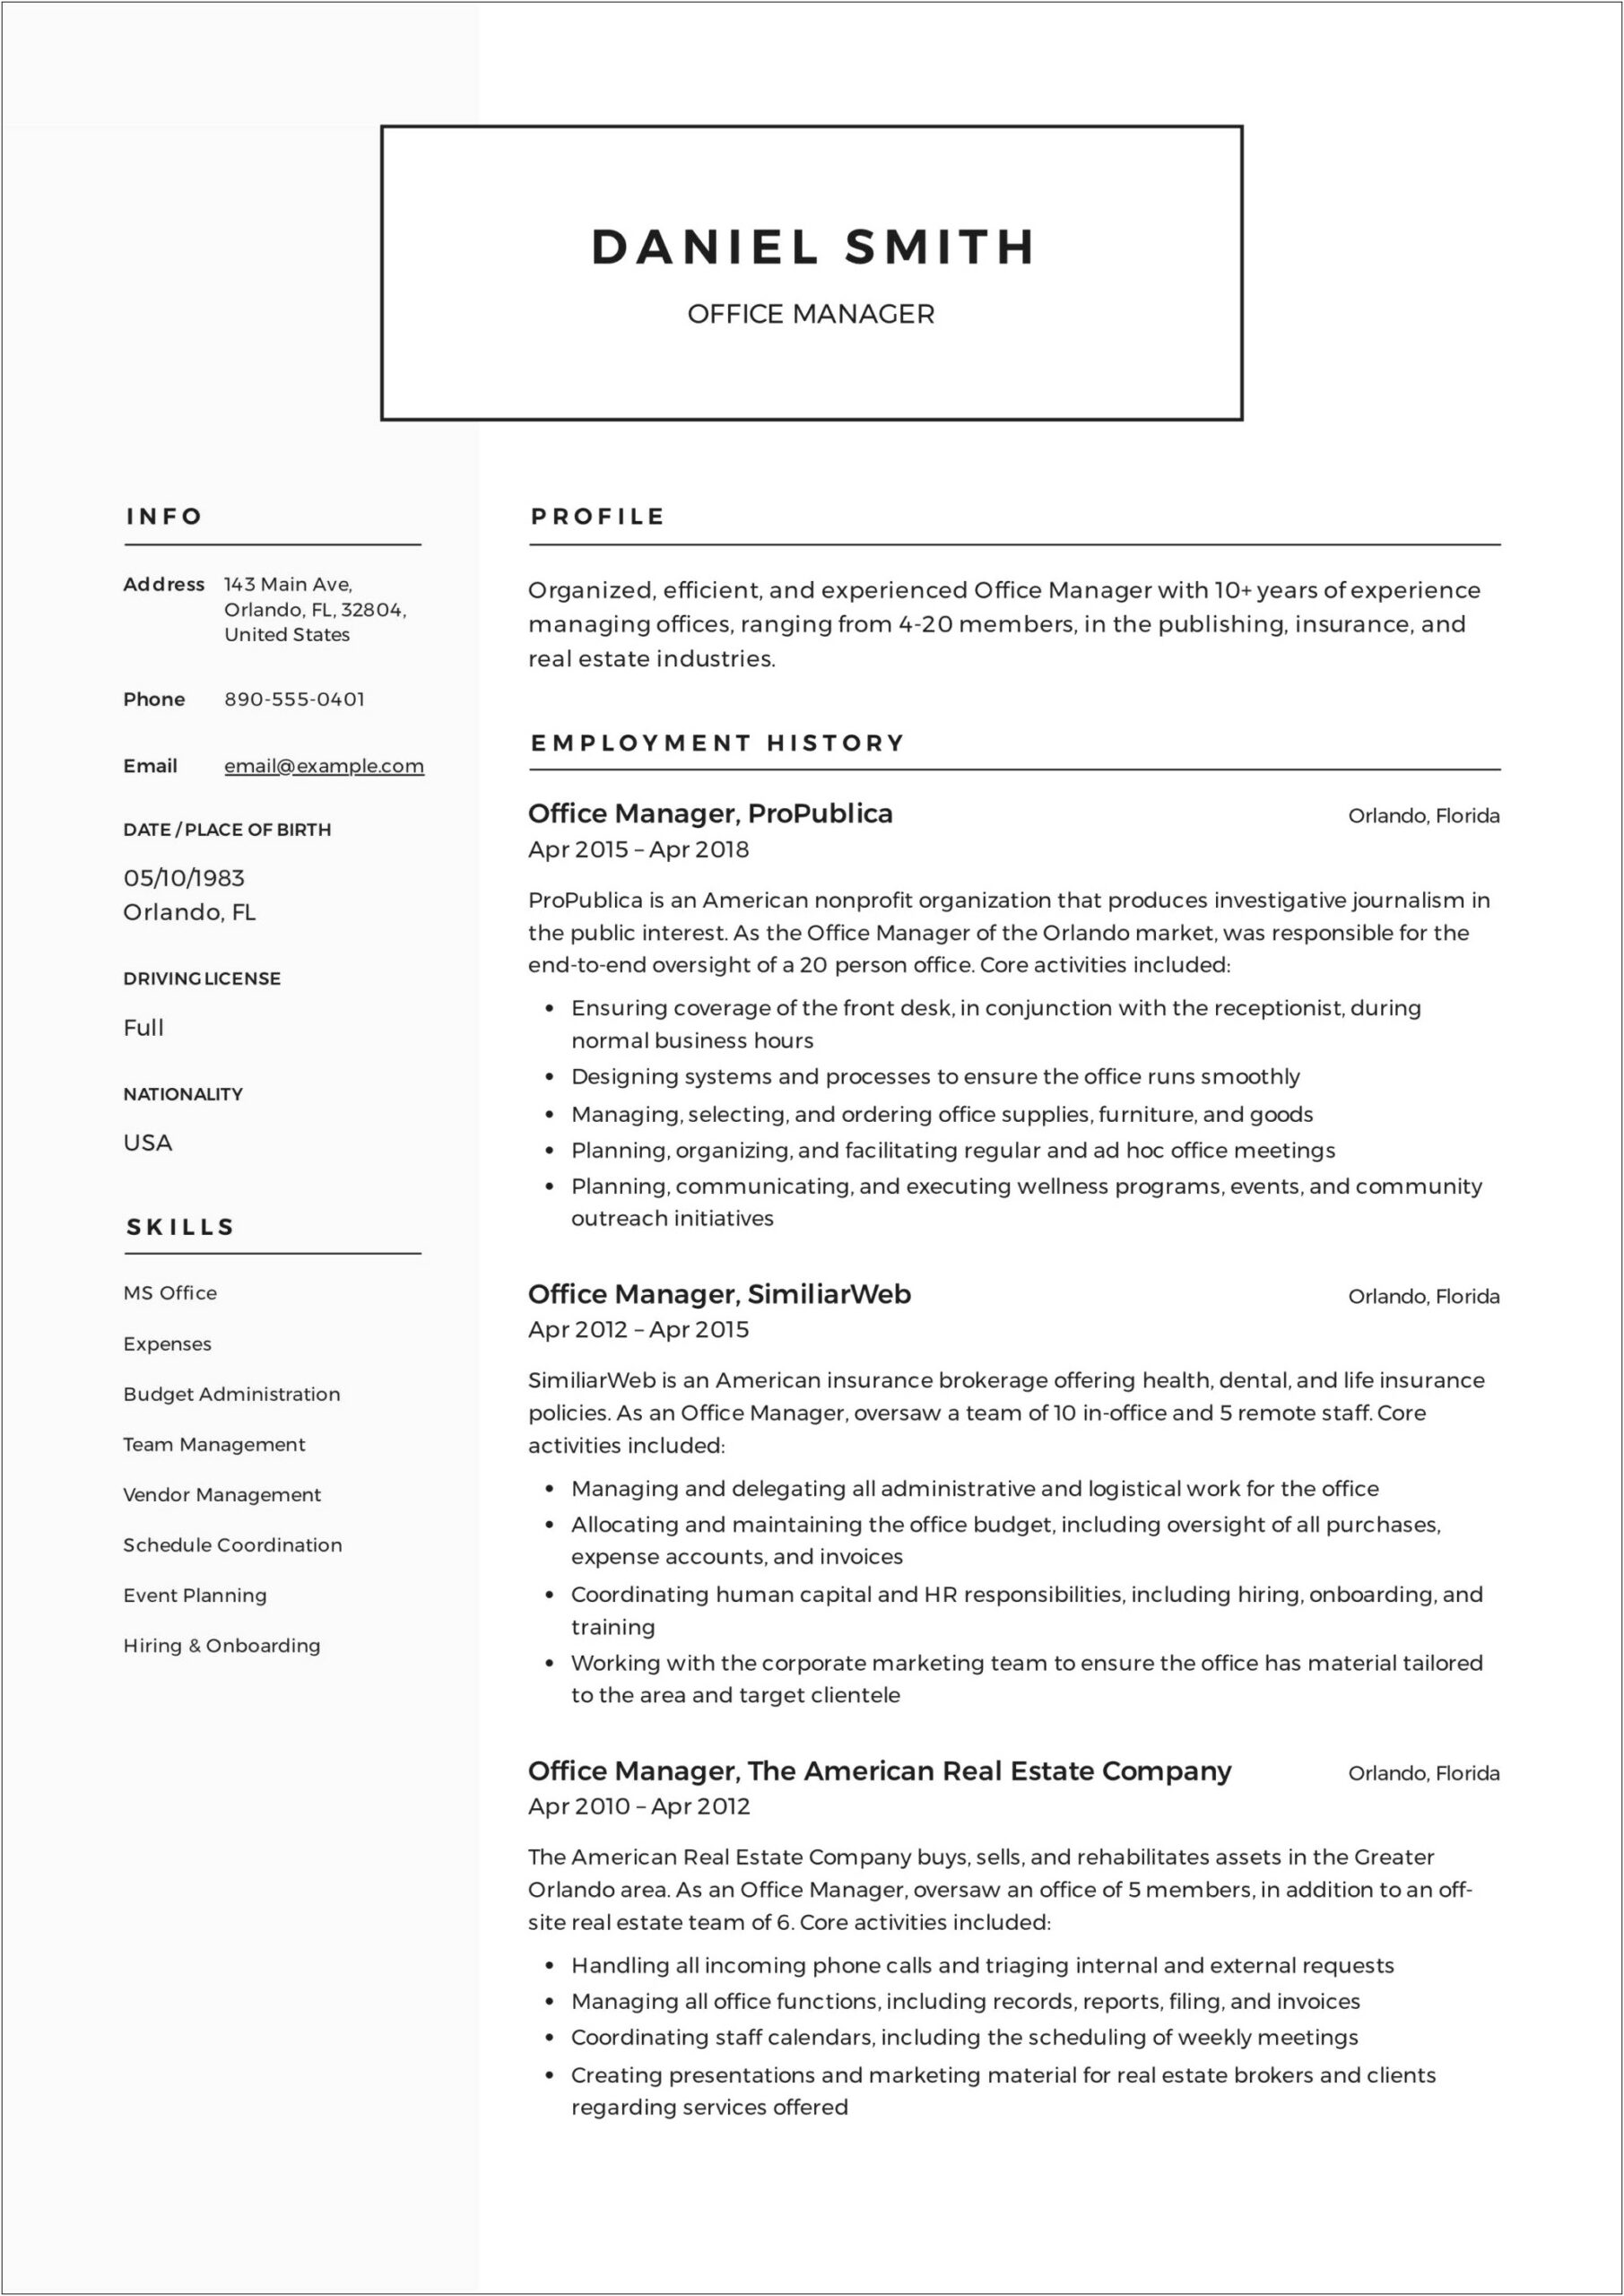 Office Manager Resume Professional Summary